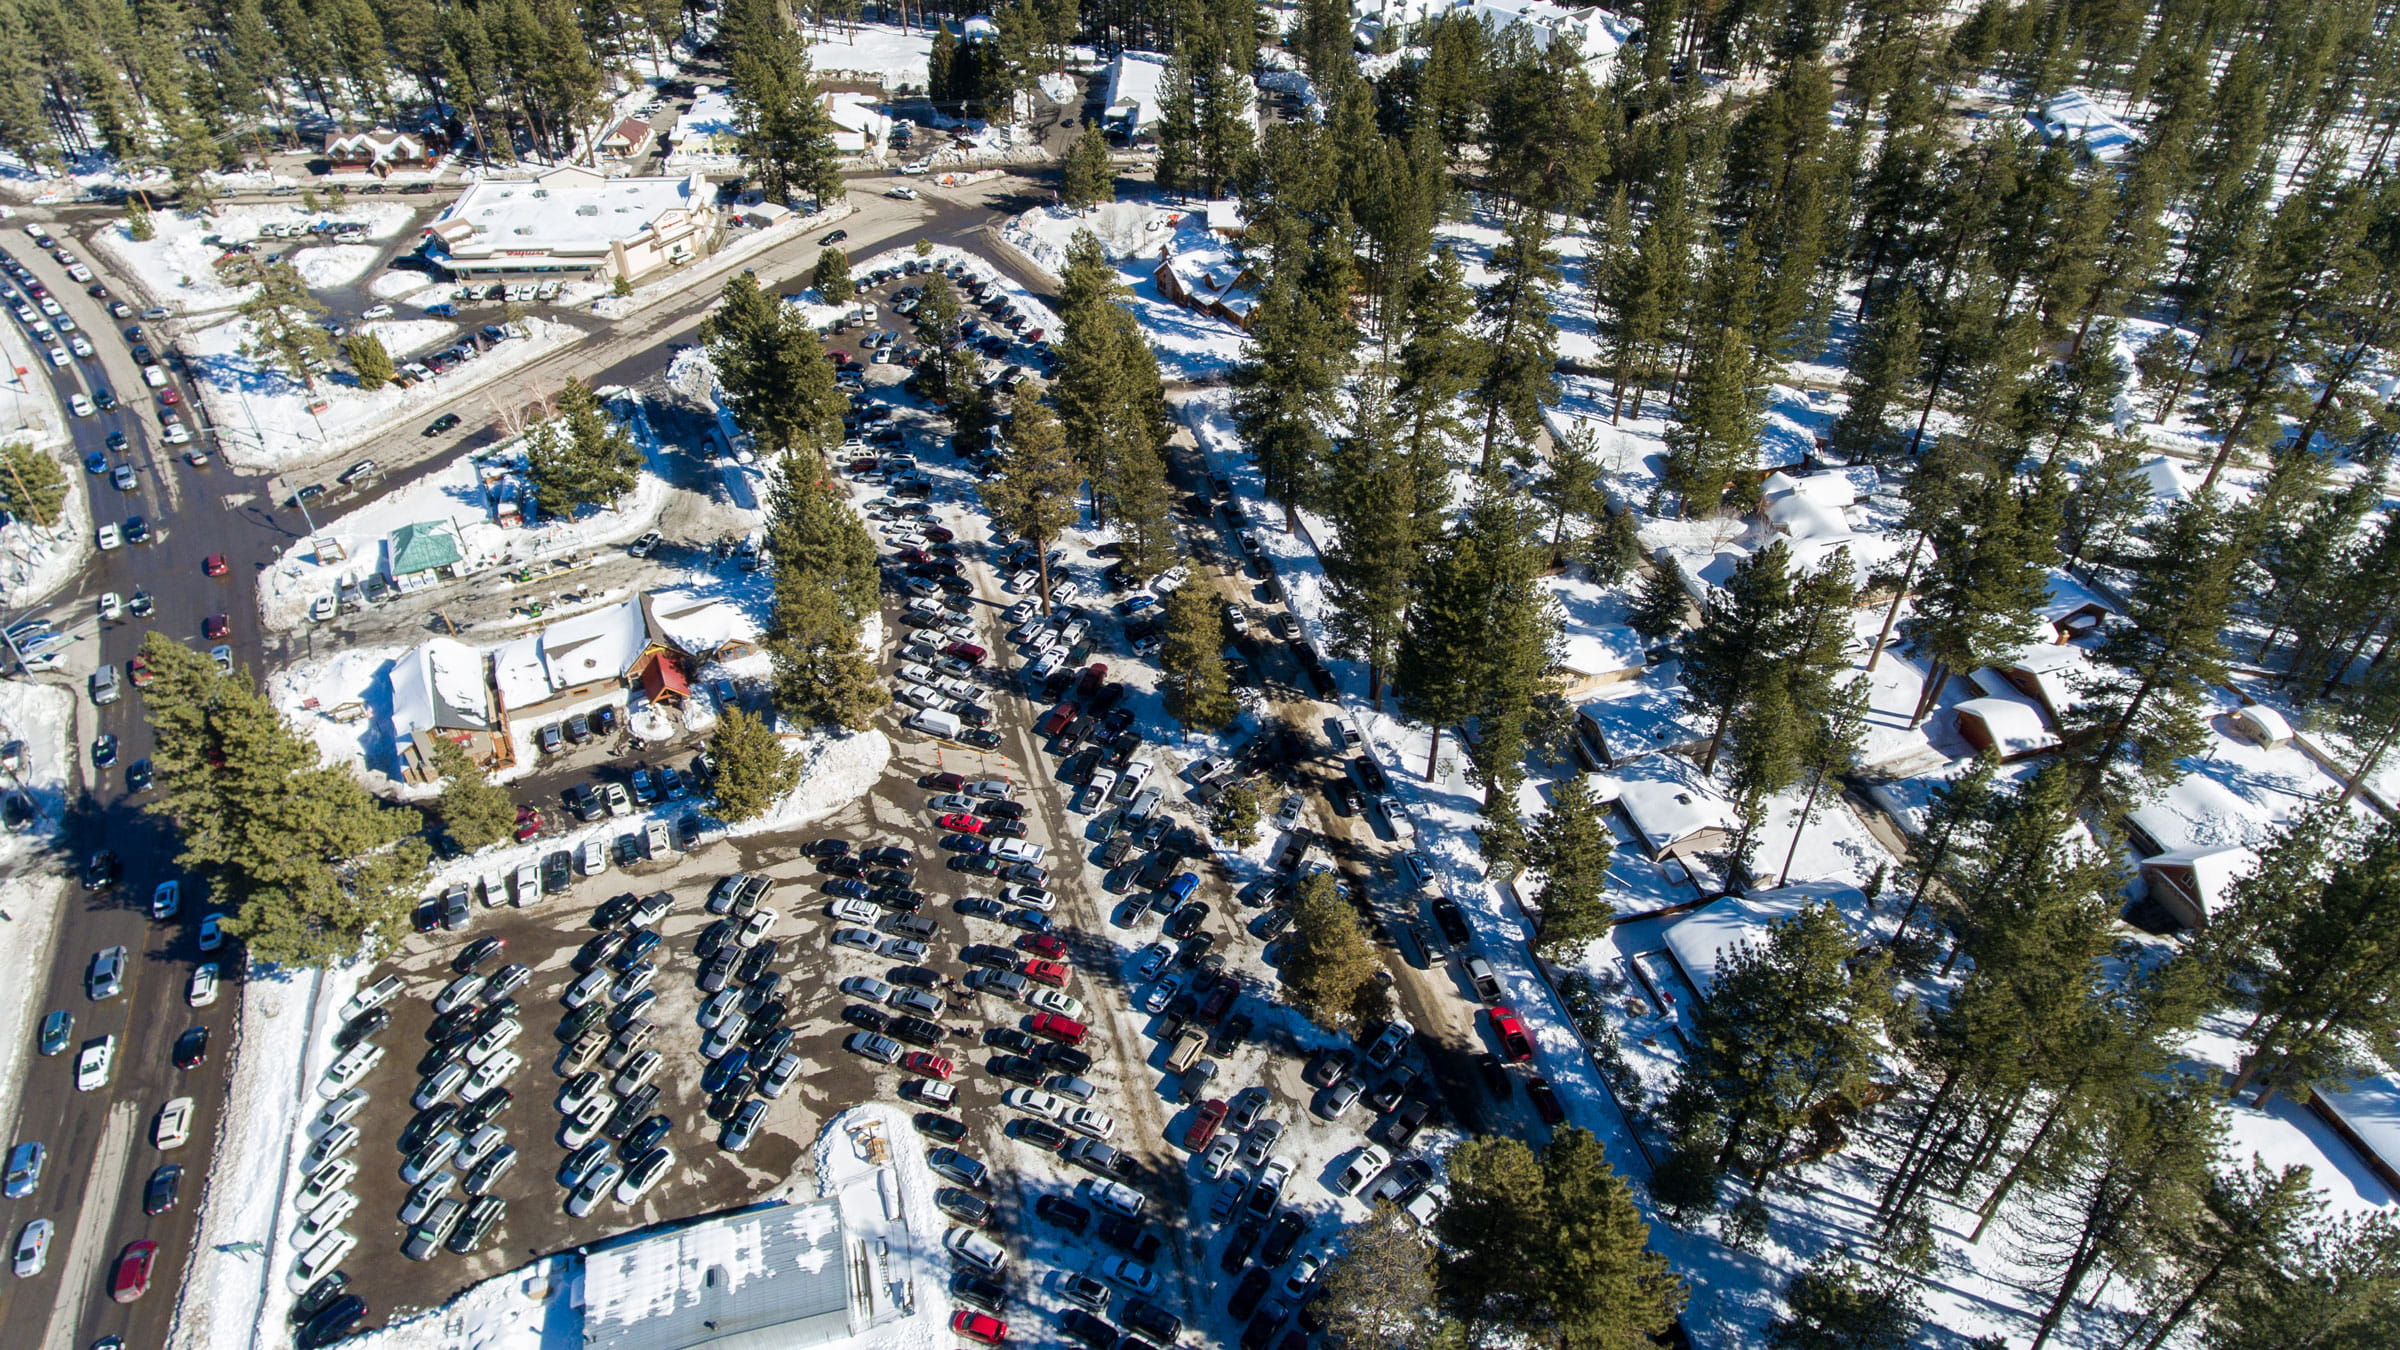 Drone view of parking lot in big bear lake